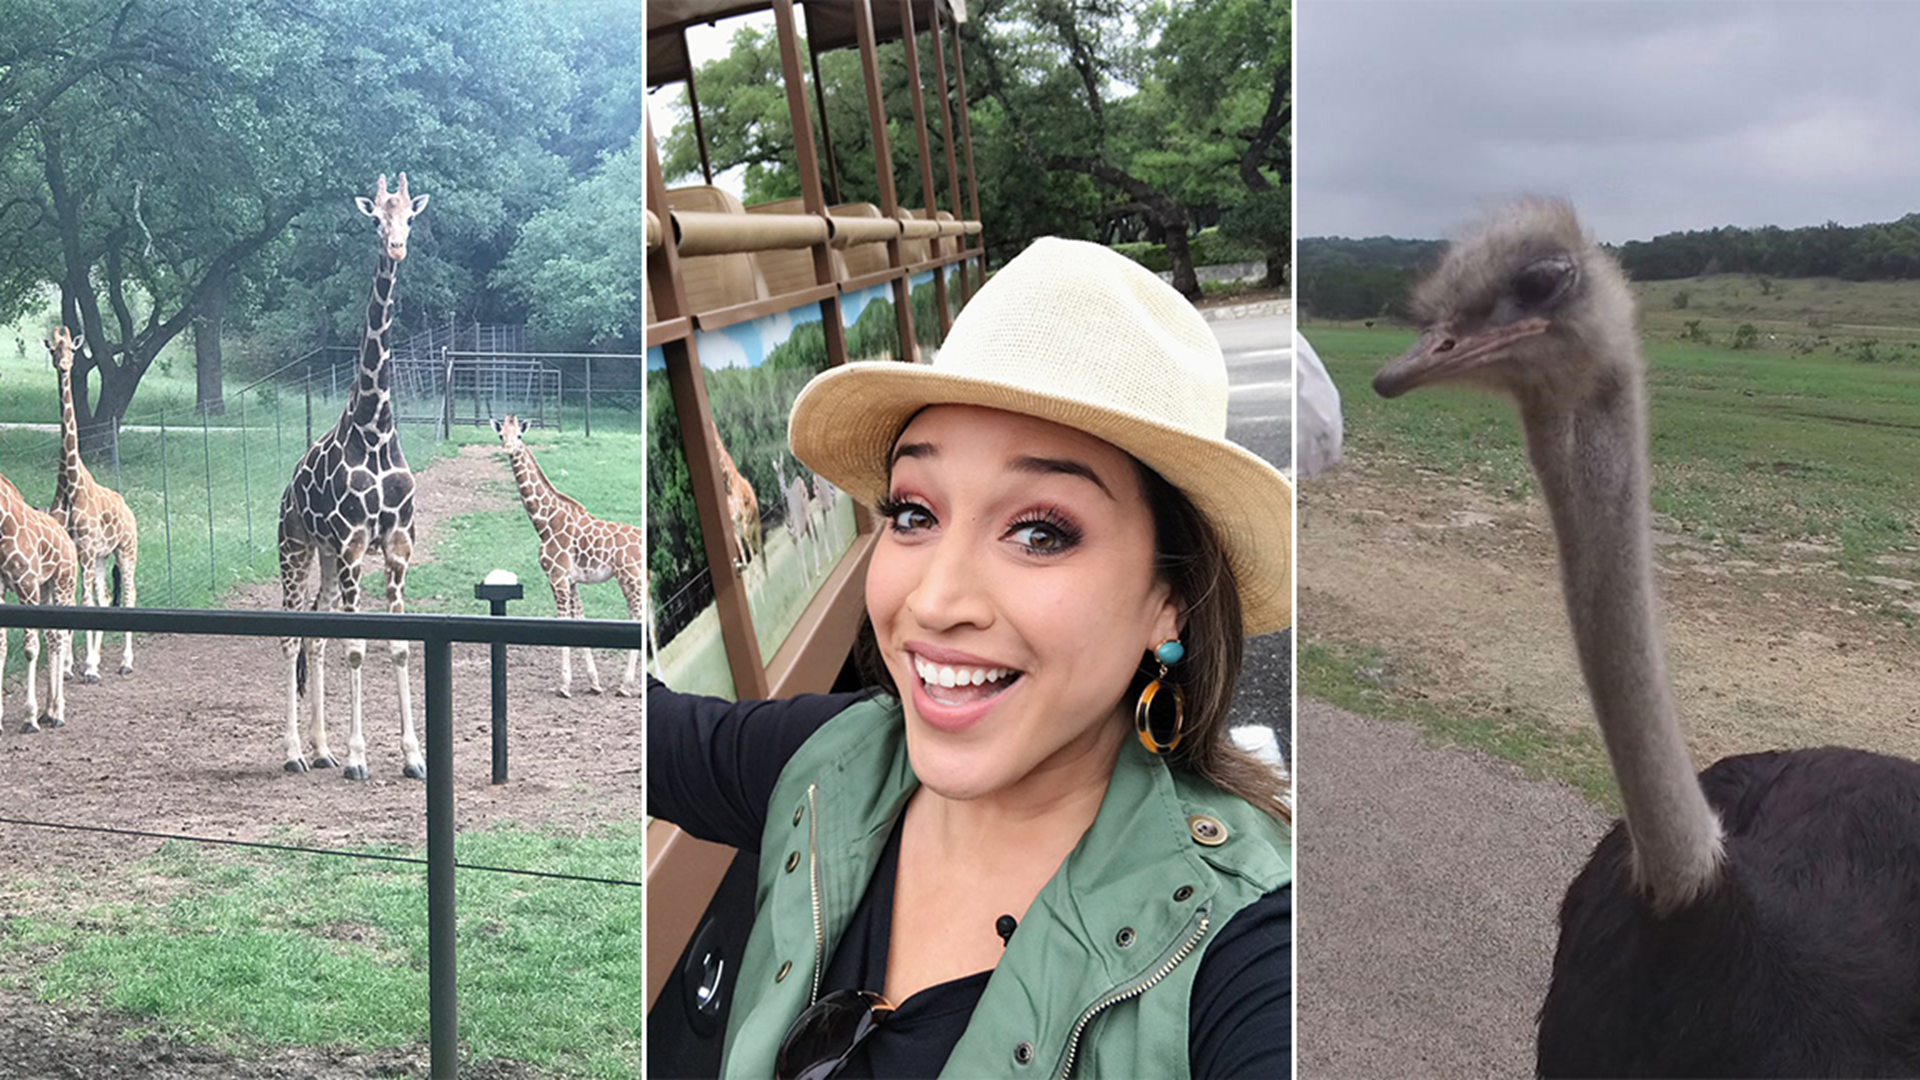 Natural Bridge Wildlife Ranch is home to more than 500 animals and is made up of 45 different species. At least 20 of those animals are some level of endangerment.